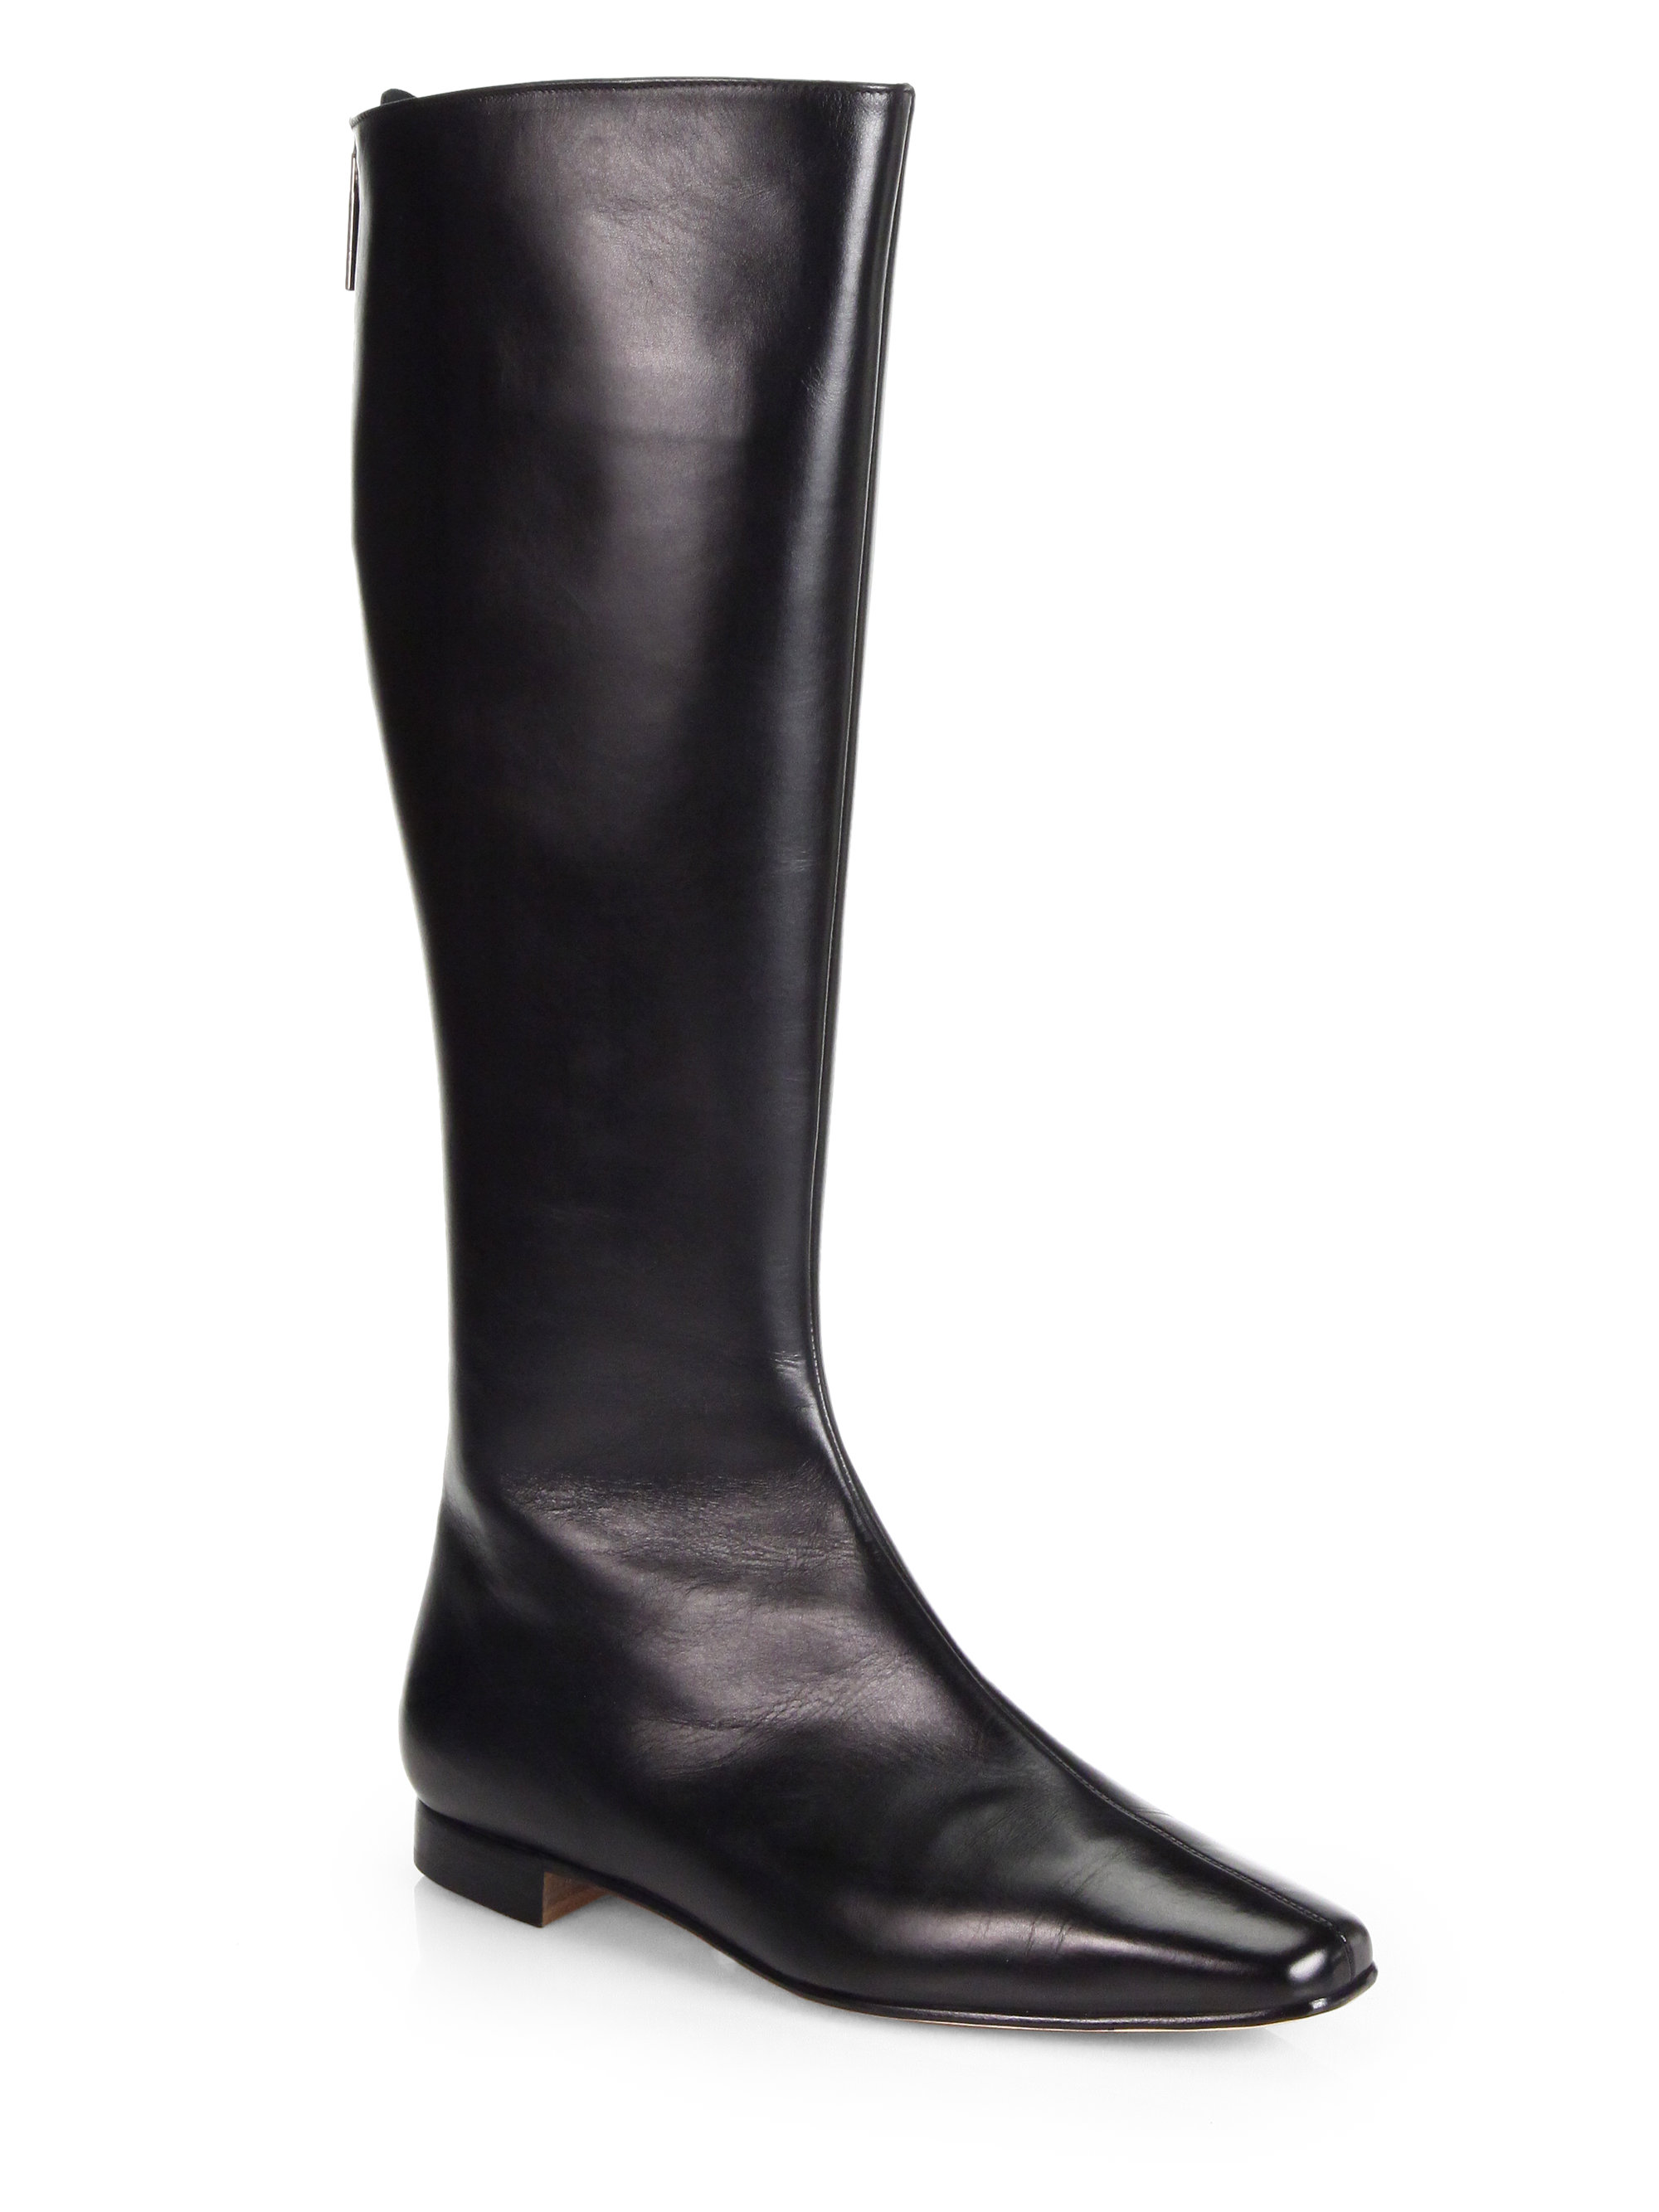 Manolo Blahnik Courrihi Leather Boots in Black | Lyst